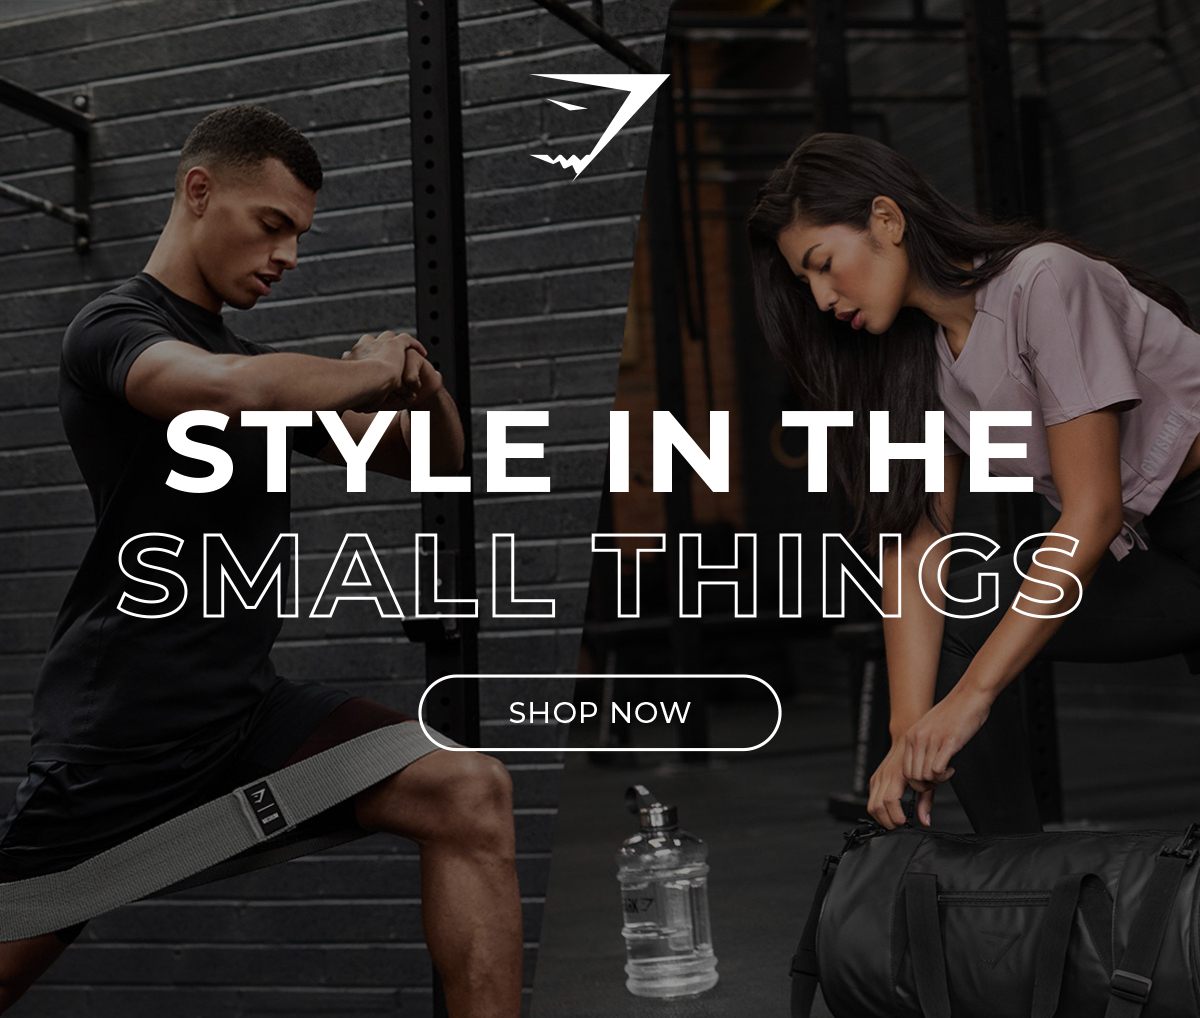 Style in the small things. Shop now.